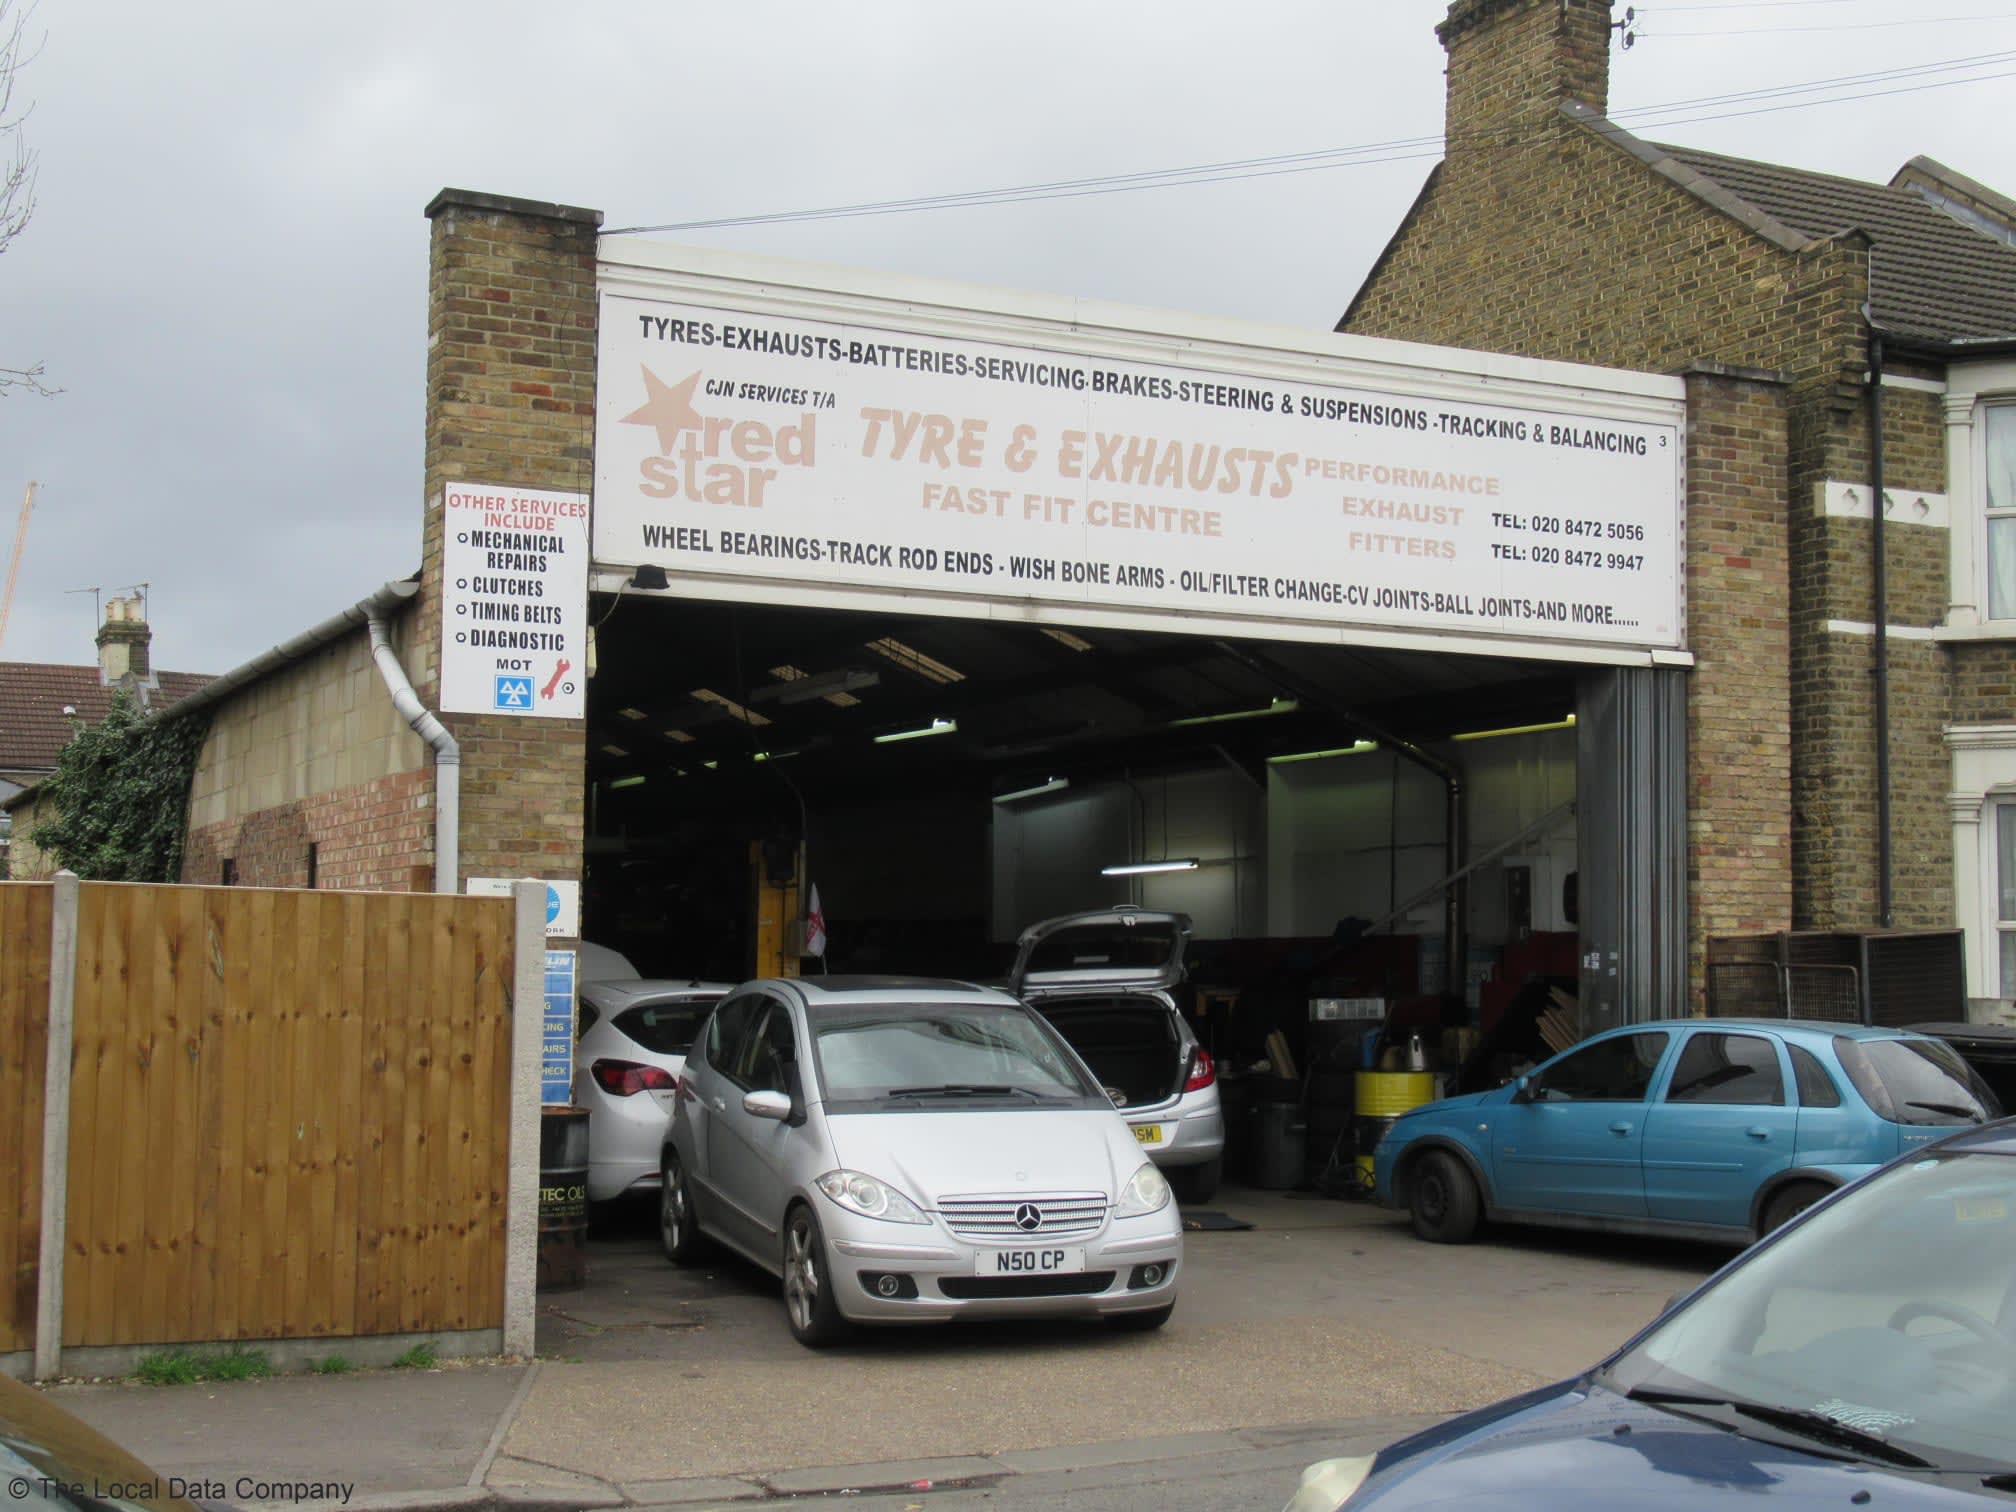 Red Star Tyres & Exhaust Centre London 020 8472 5056